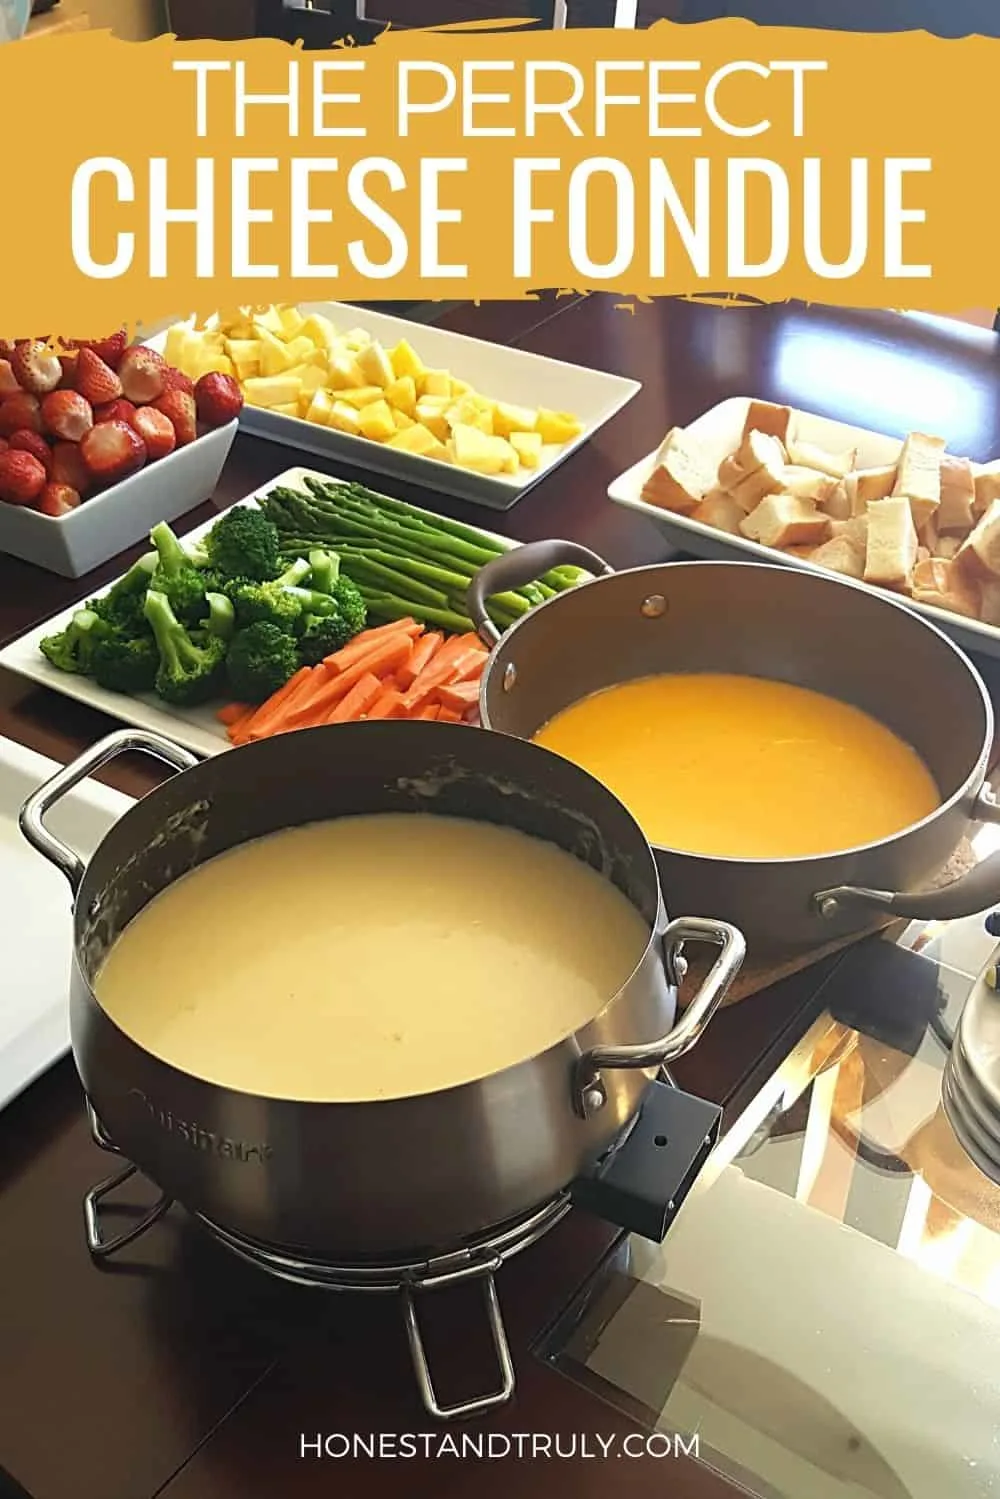 Table of cheese fondue pots and dip items with text The Perfect Cheese Fondue.